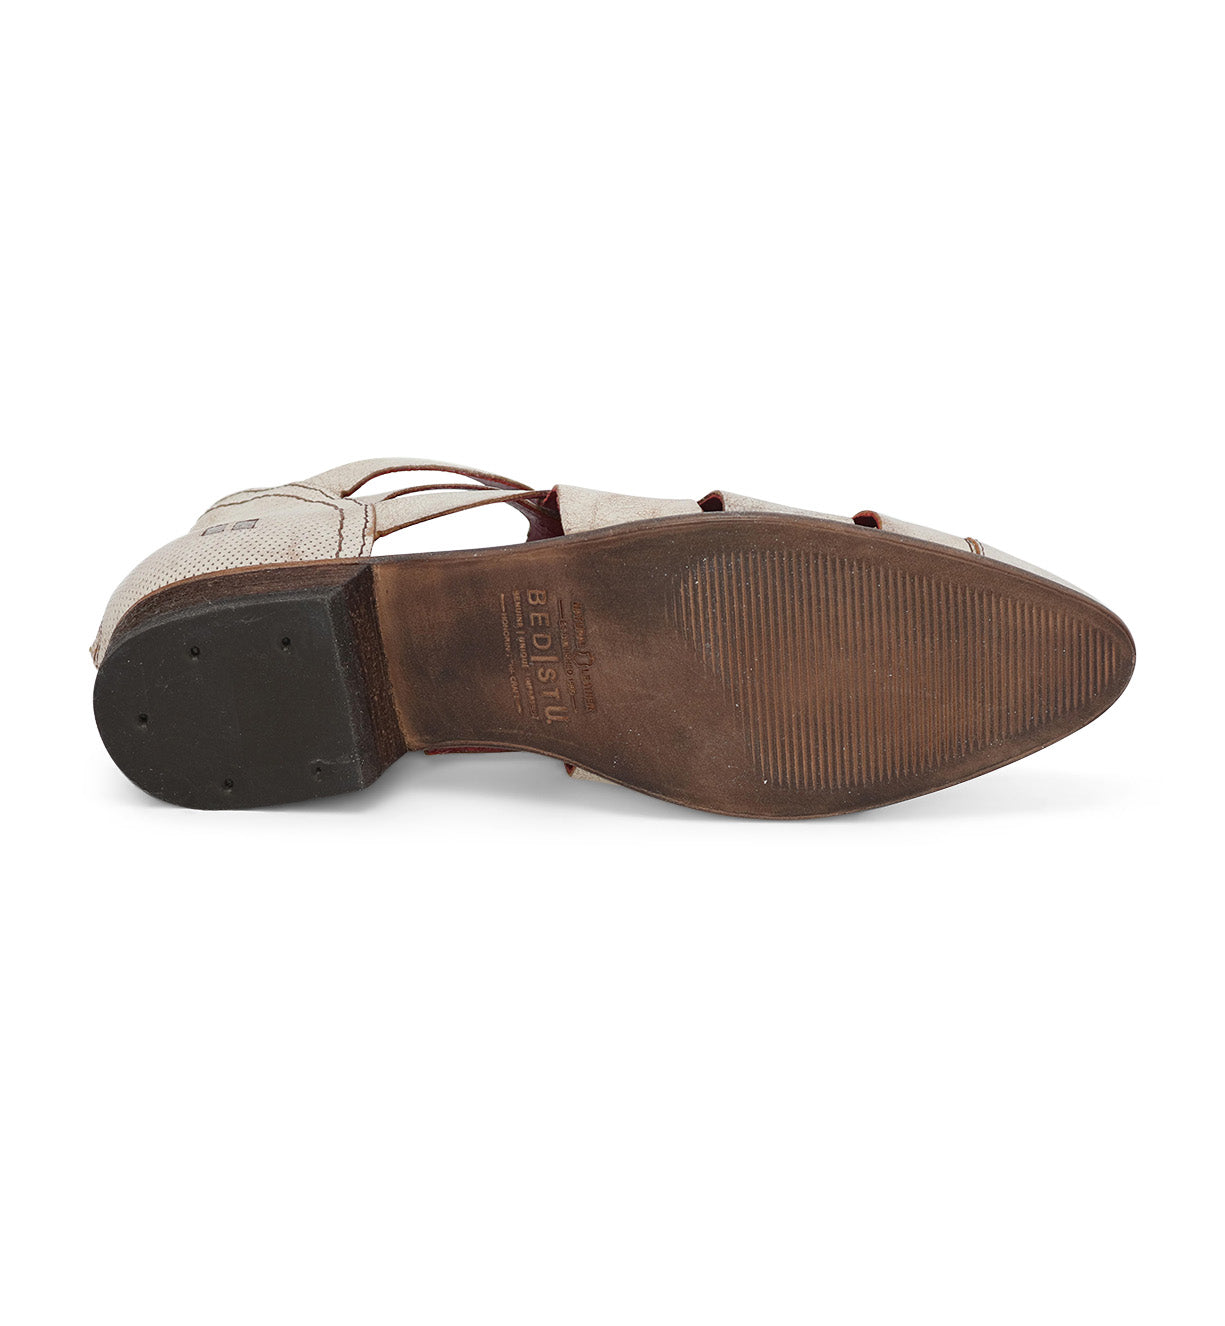 The back of a Bed Stu Brittany women's shoe with a leather sole.